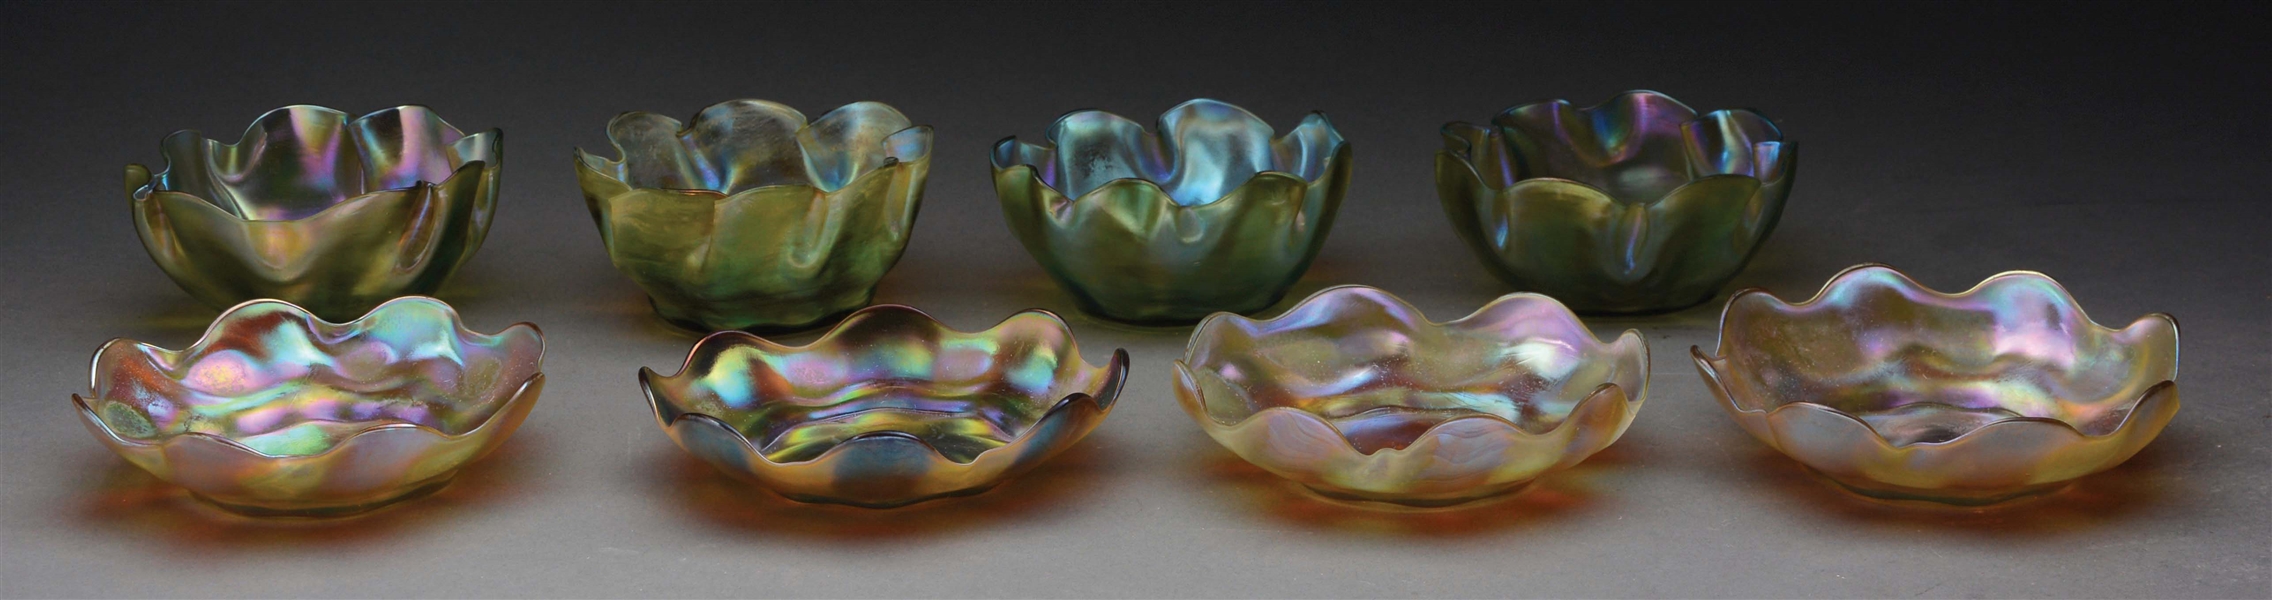 TIFFANY FAVRILE FINGER BOWLS AND UNDER PLATES.